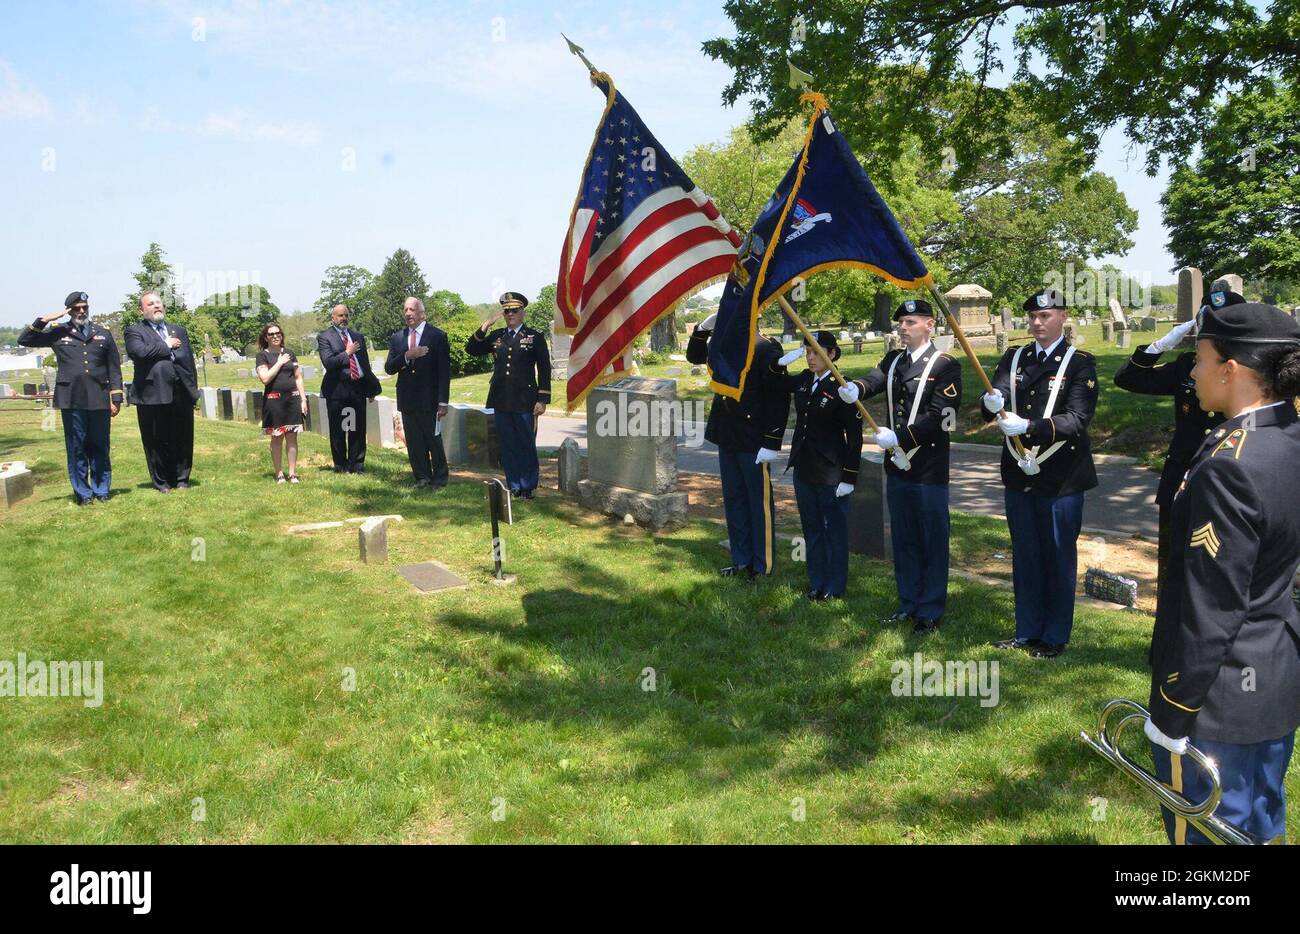 New York Army National Guard Soldiers assigned to the 107th Military Police Company present the colors and render honors to Union Sgt. Benjamin Levy, the first Jewish American to receive the Medal of Honor, at his burial site at Cypress Hills Cemetery in Brooklyn, N.Y., May 21, 2021. Levy was a New York Soldier who received the Medal of Honor for his actions to save his regimental colors and rally his unit, the 1st New York Volunteer Infantry Regiment, during the Battle of Glendale in June 1862. Stock Photo